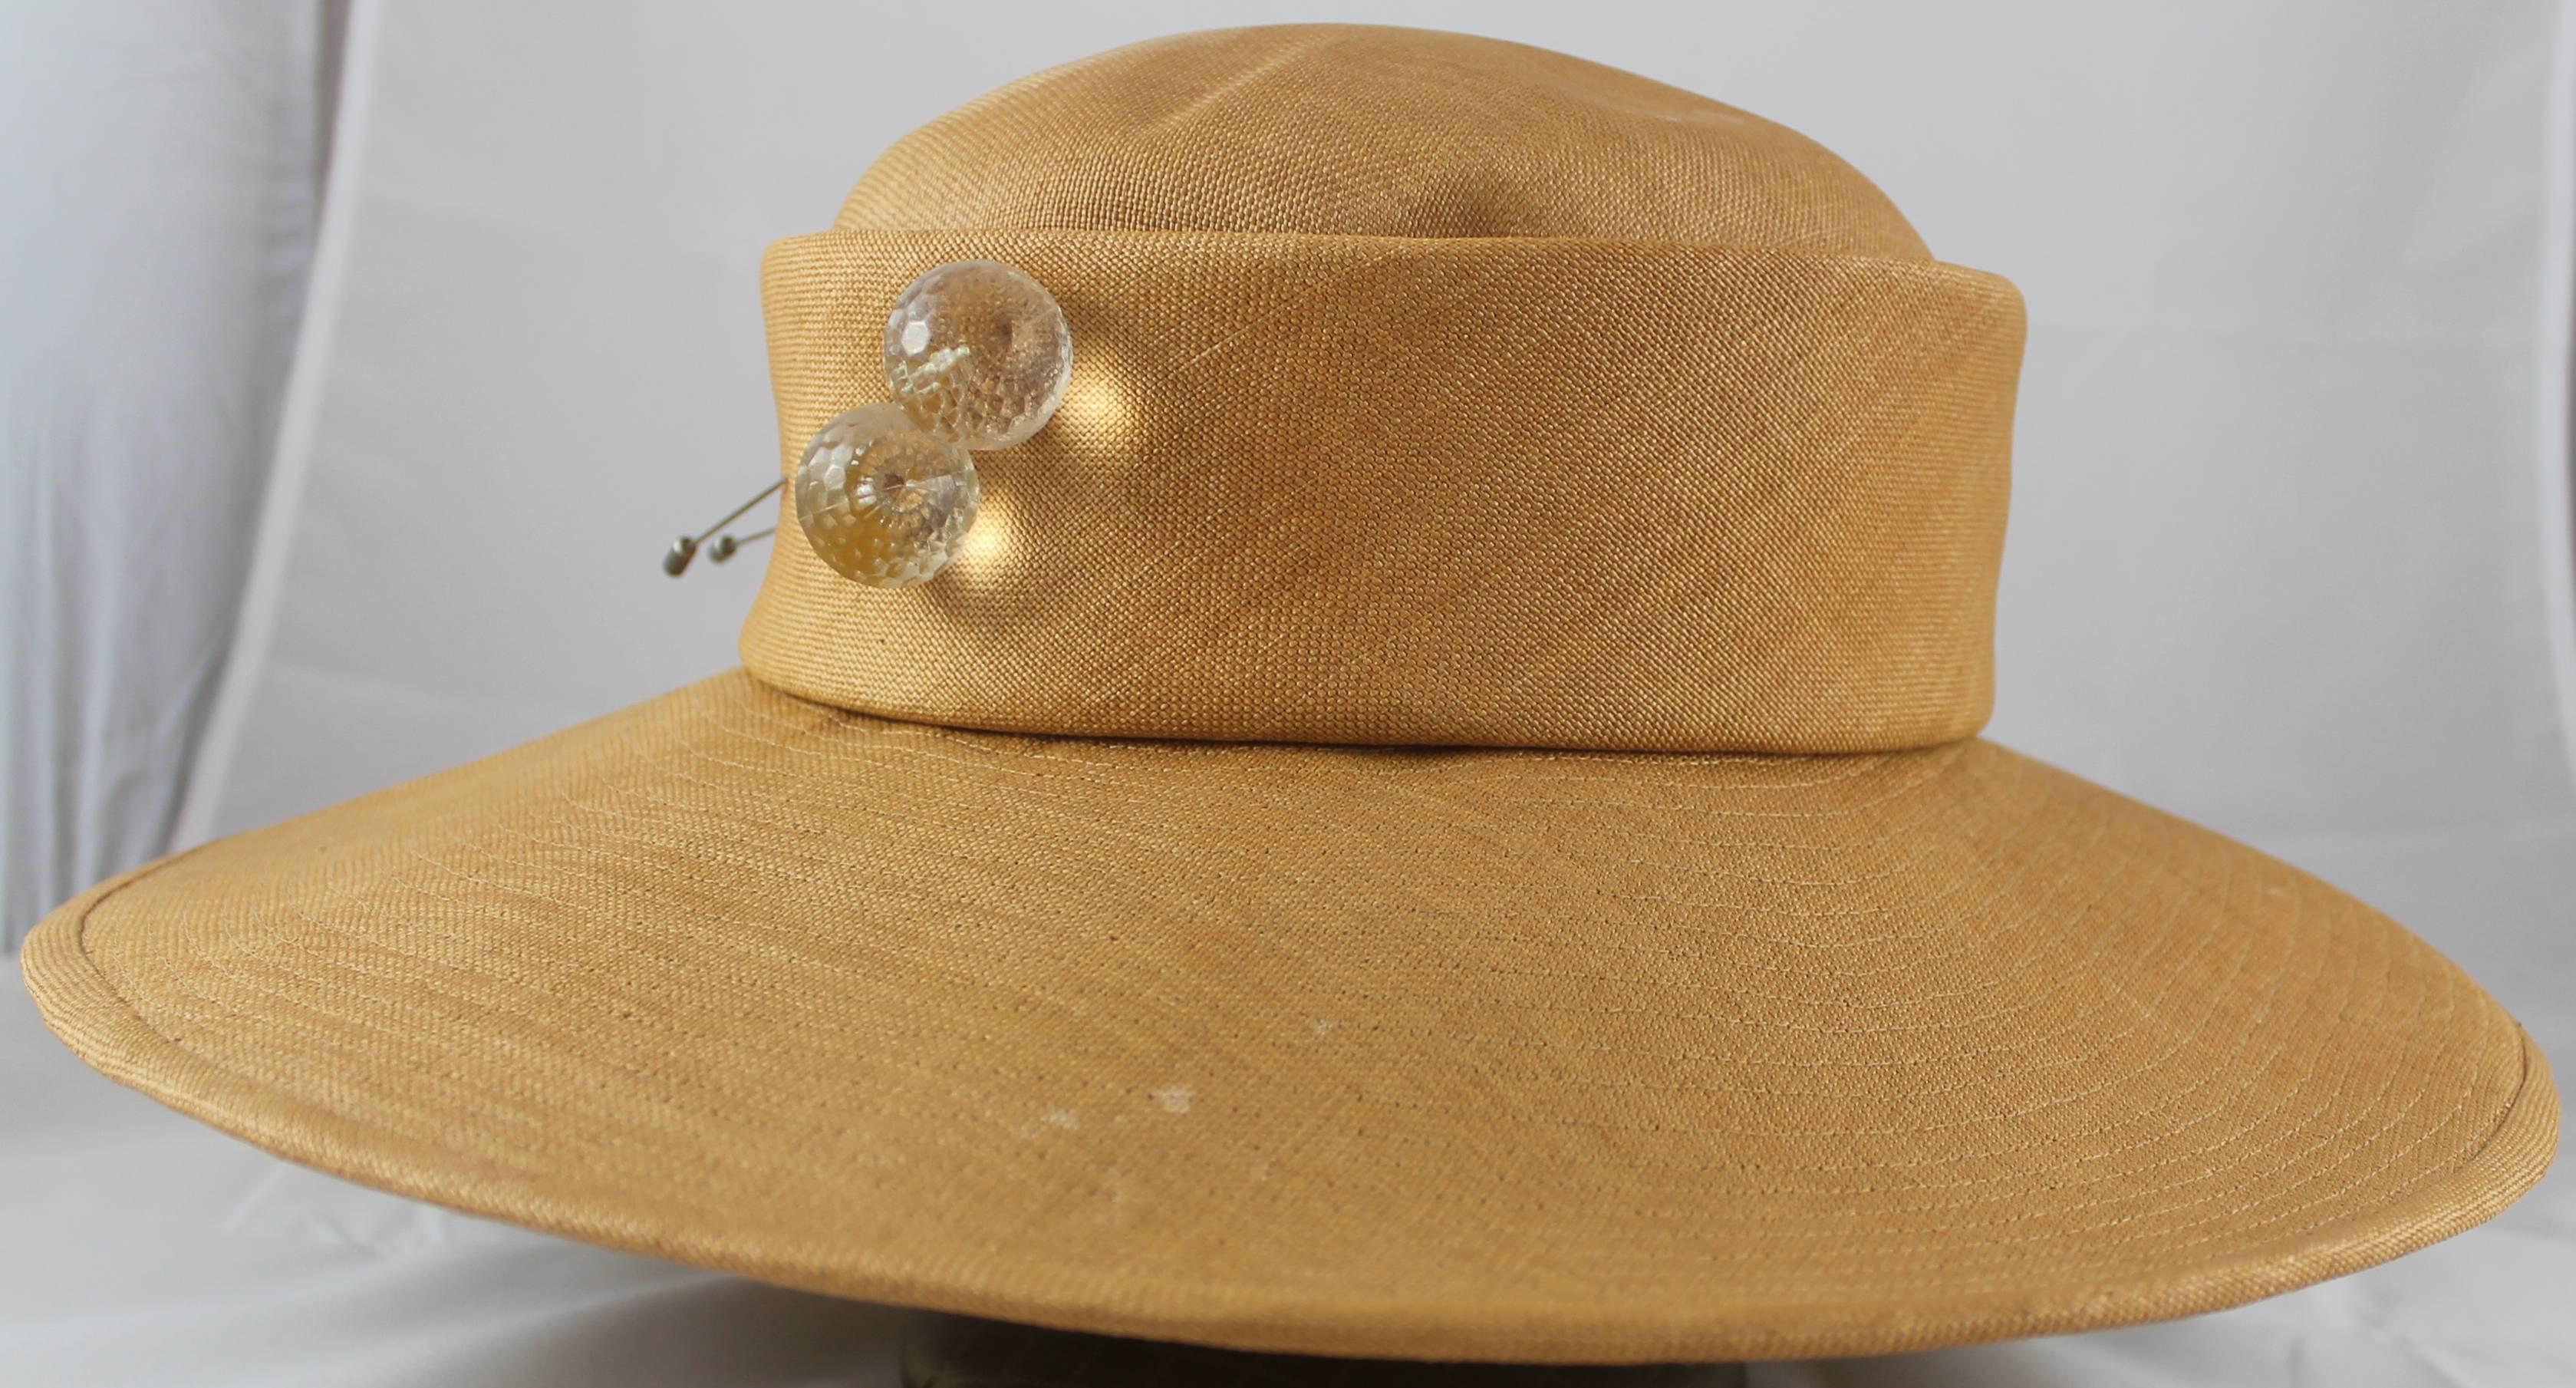 Suzanne Couture Millinery Luggage Straw Hat with Lucite Pins. This hat is in very good condition with a couple spots on the top and the brim (shown in images). The hat features a wide brim with a stitched look.

Brim- 4.25